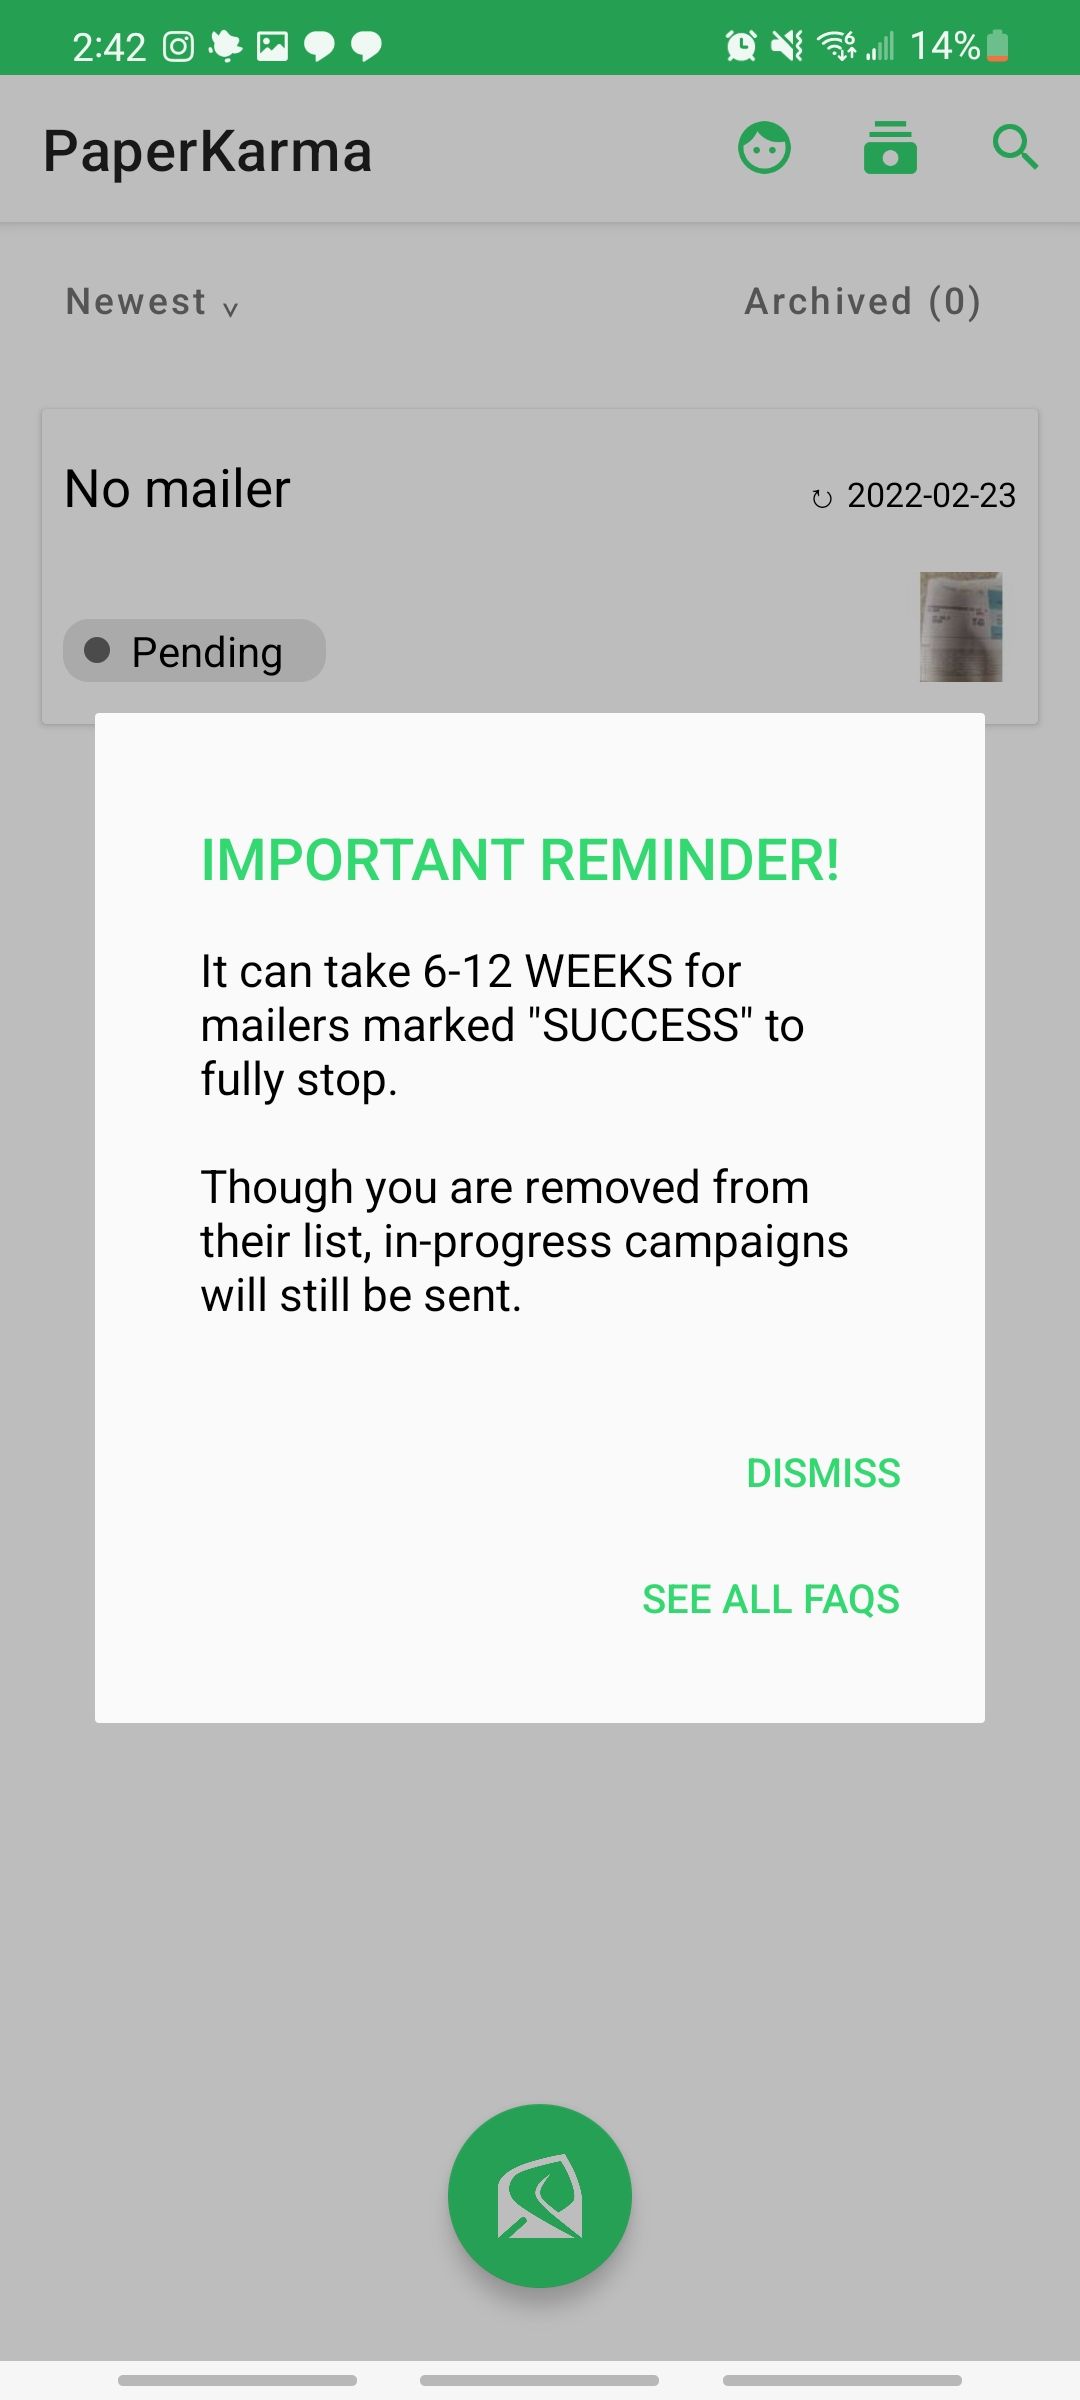 paperkarma app successfully stopping junk mail in six to twelve weeks after your request